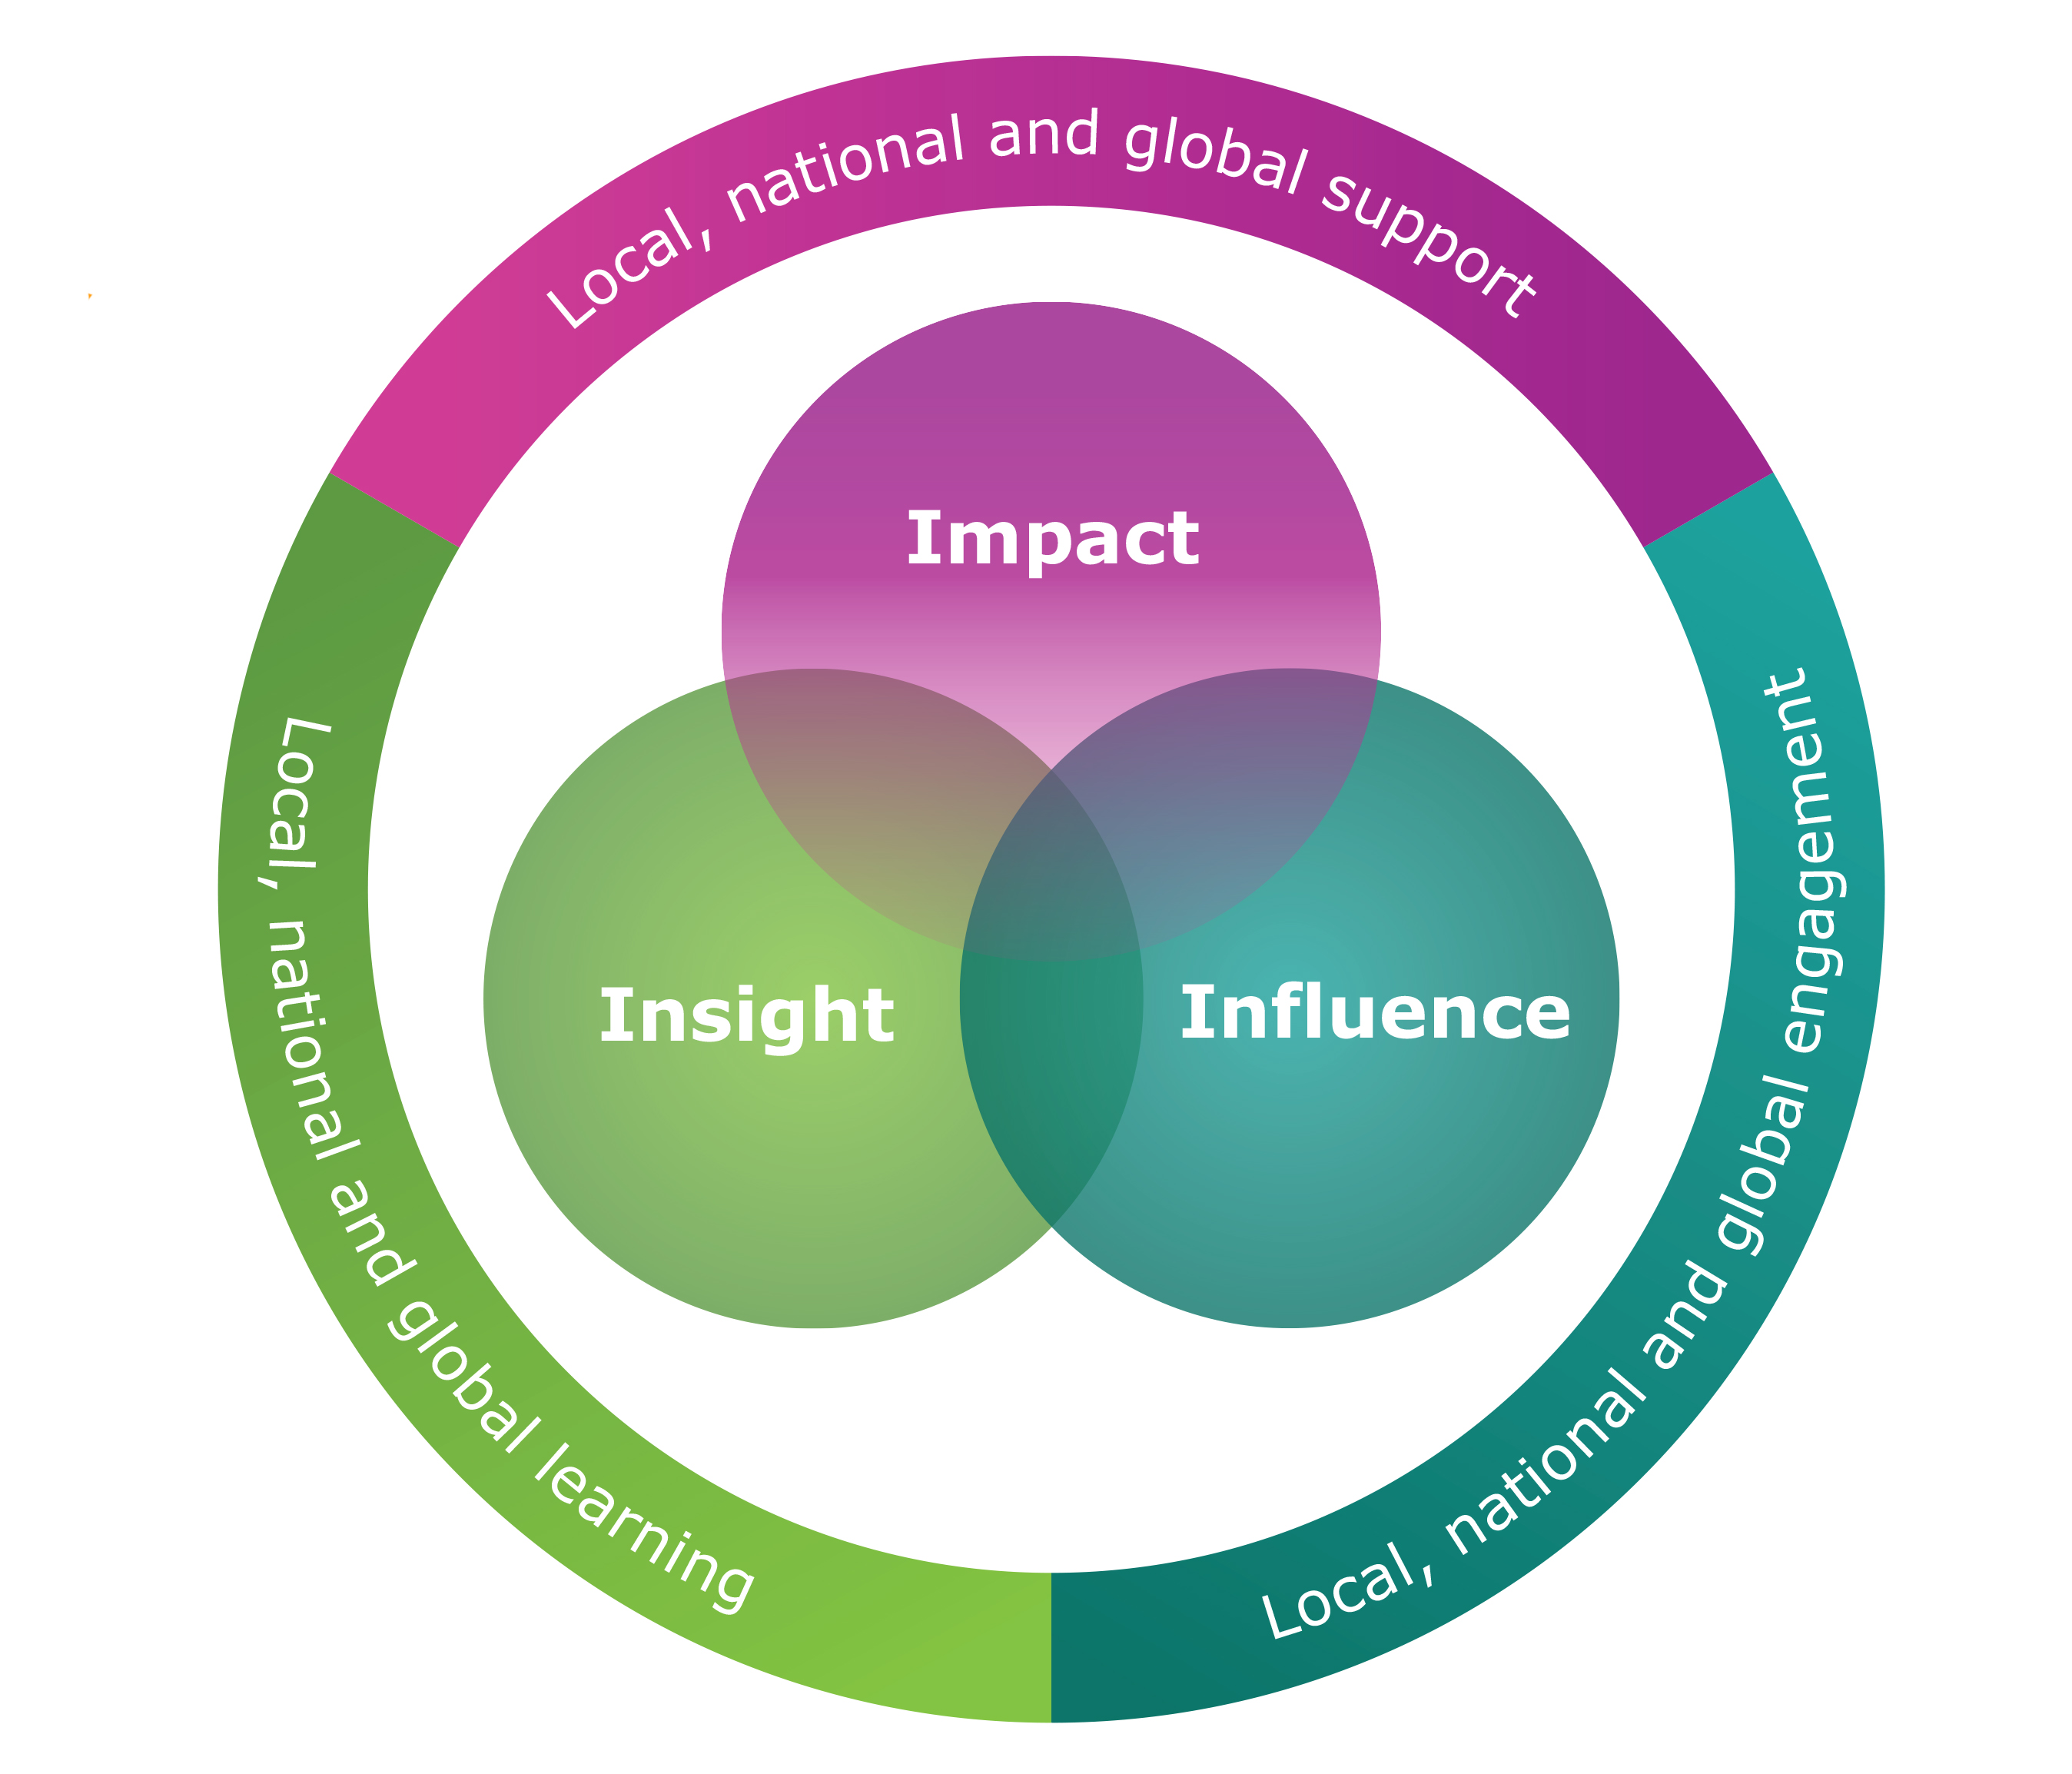 The CELCIS Strategy - Impact, Insight and Influence